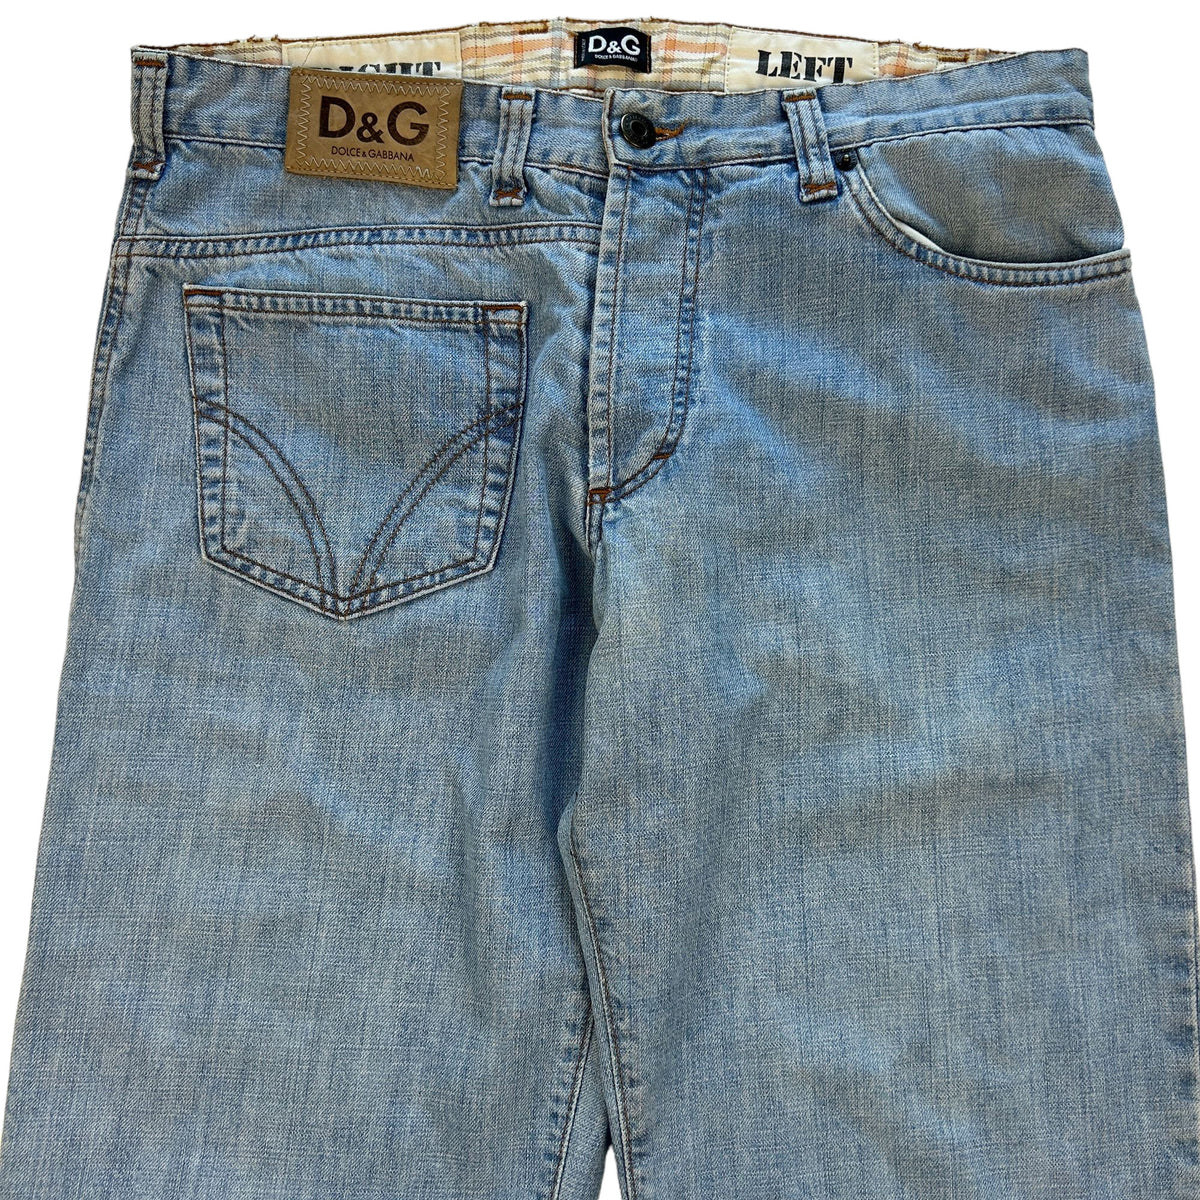 VIntage Dolce and Gabbana Twisted Features Denim Jeans Women&#39;s Size W32